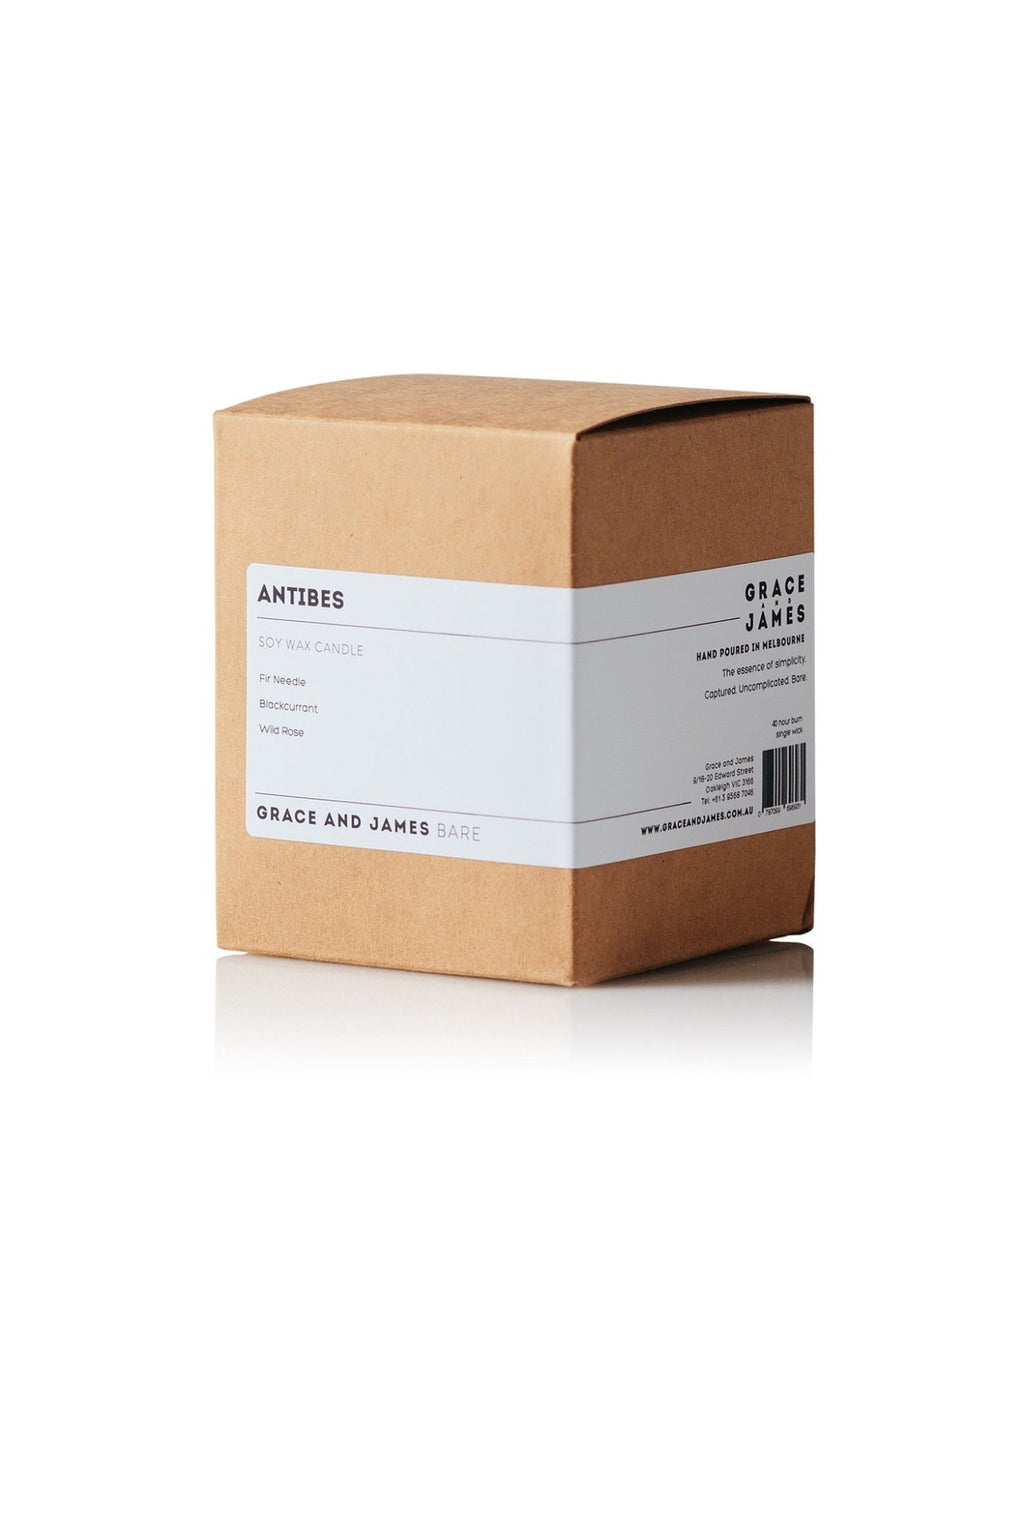 Grace and James - Antibes Scented Candle - Norsu Interiors (1552060285012)